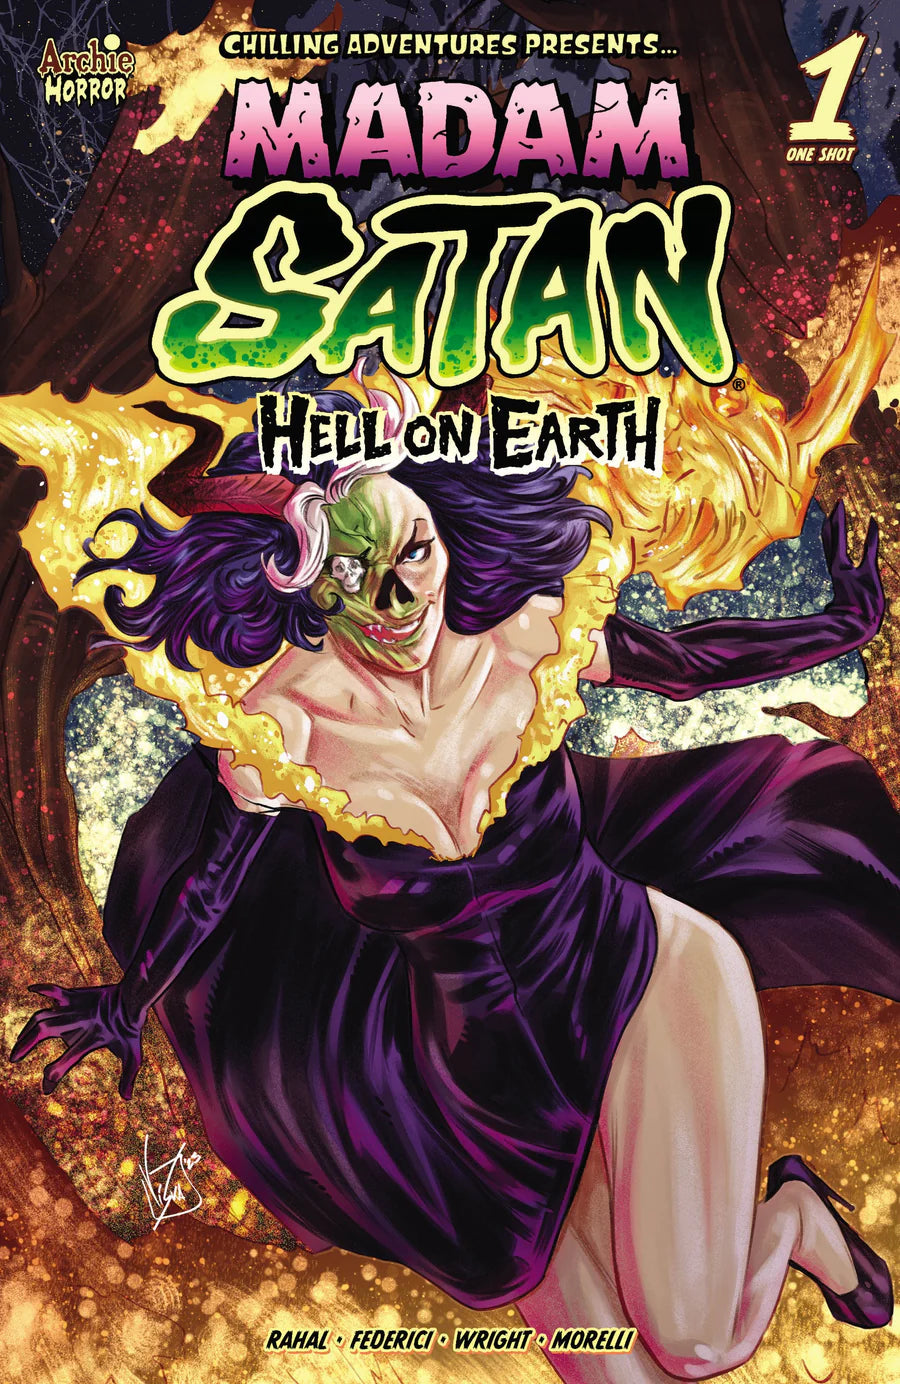 CHILLING ADVENTURES PRESENTS... MADAM SATAN: HELL ON EARTH O.S.